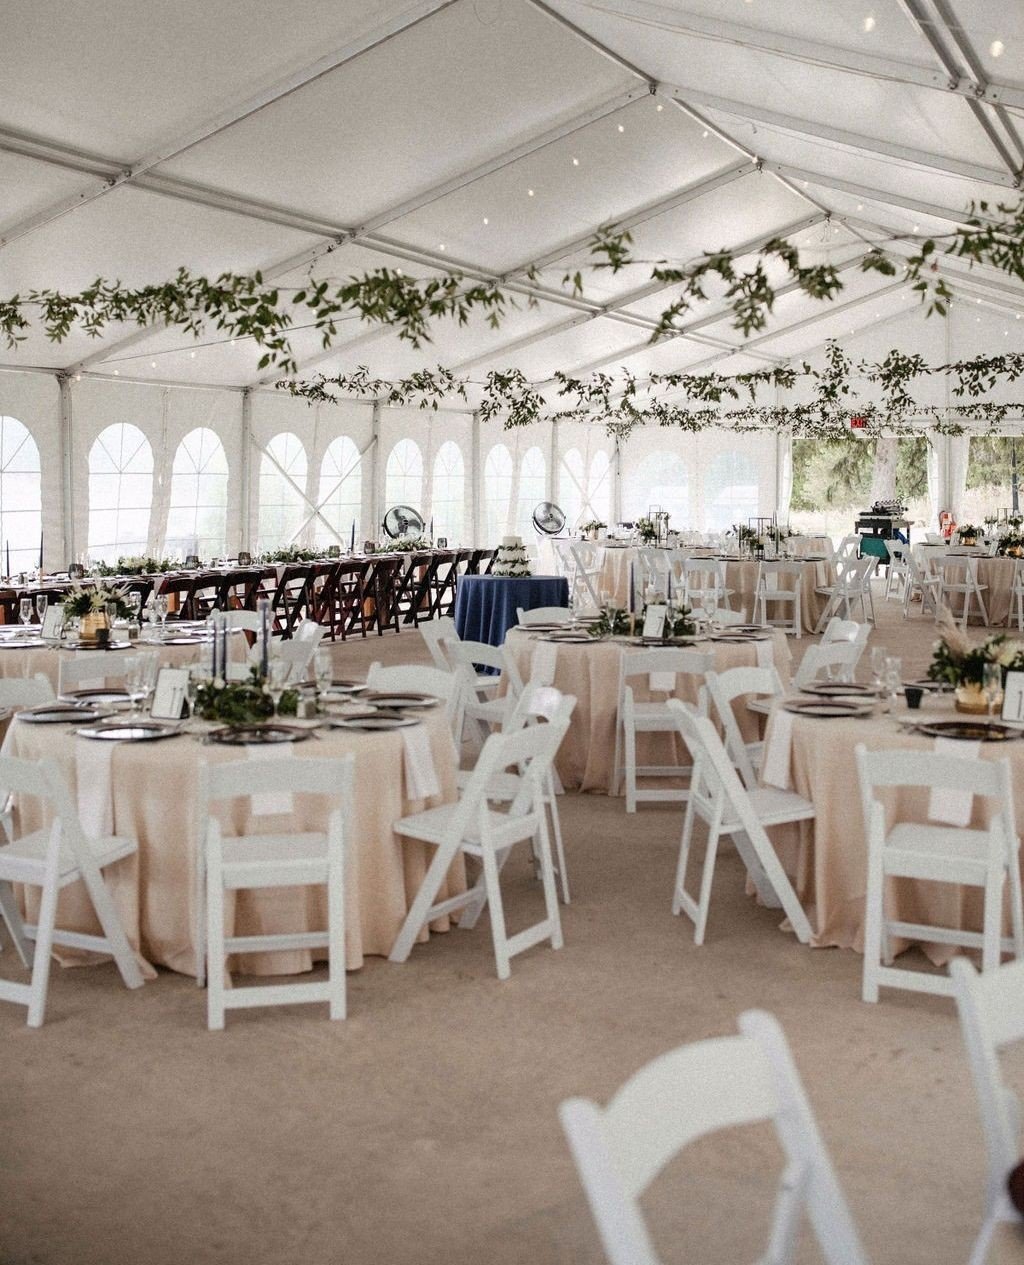 Not quite ready to embrace the bold jewel tone and primary color trends? Bringing in a neutral table linen (other than white) helps to warm up the tent and add some more visual interest without going bold. Then you can add more subtle pops of color i